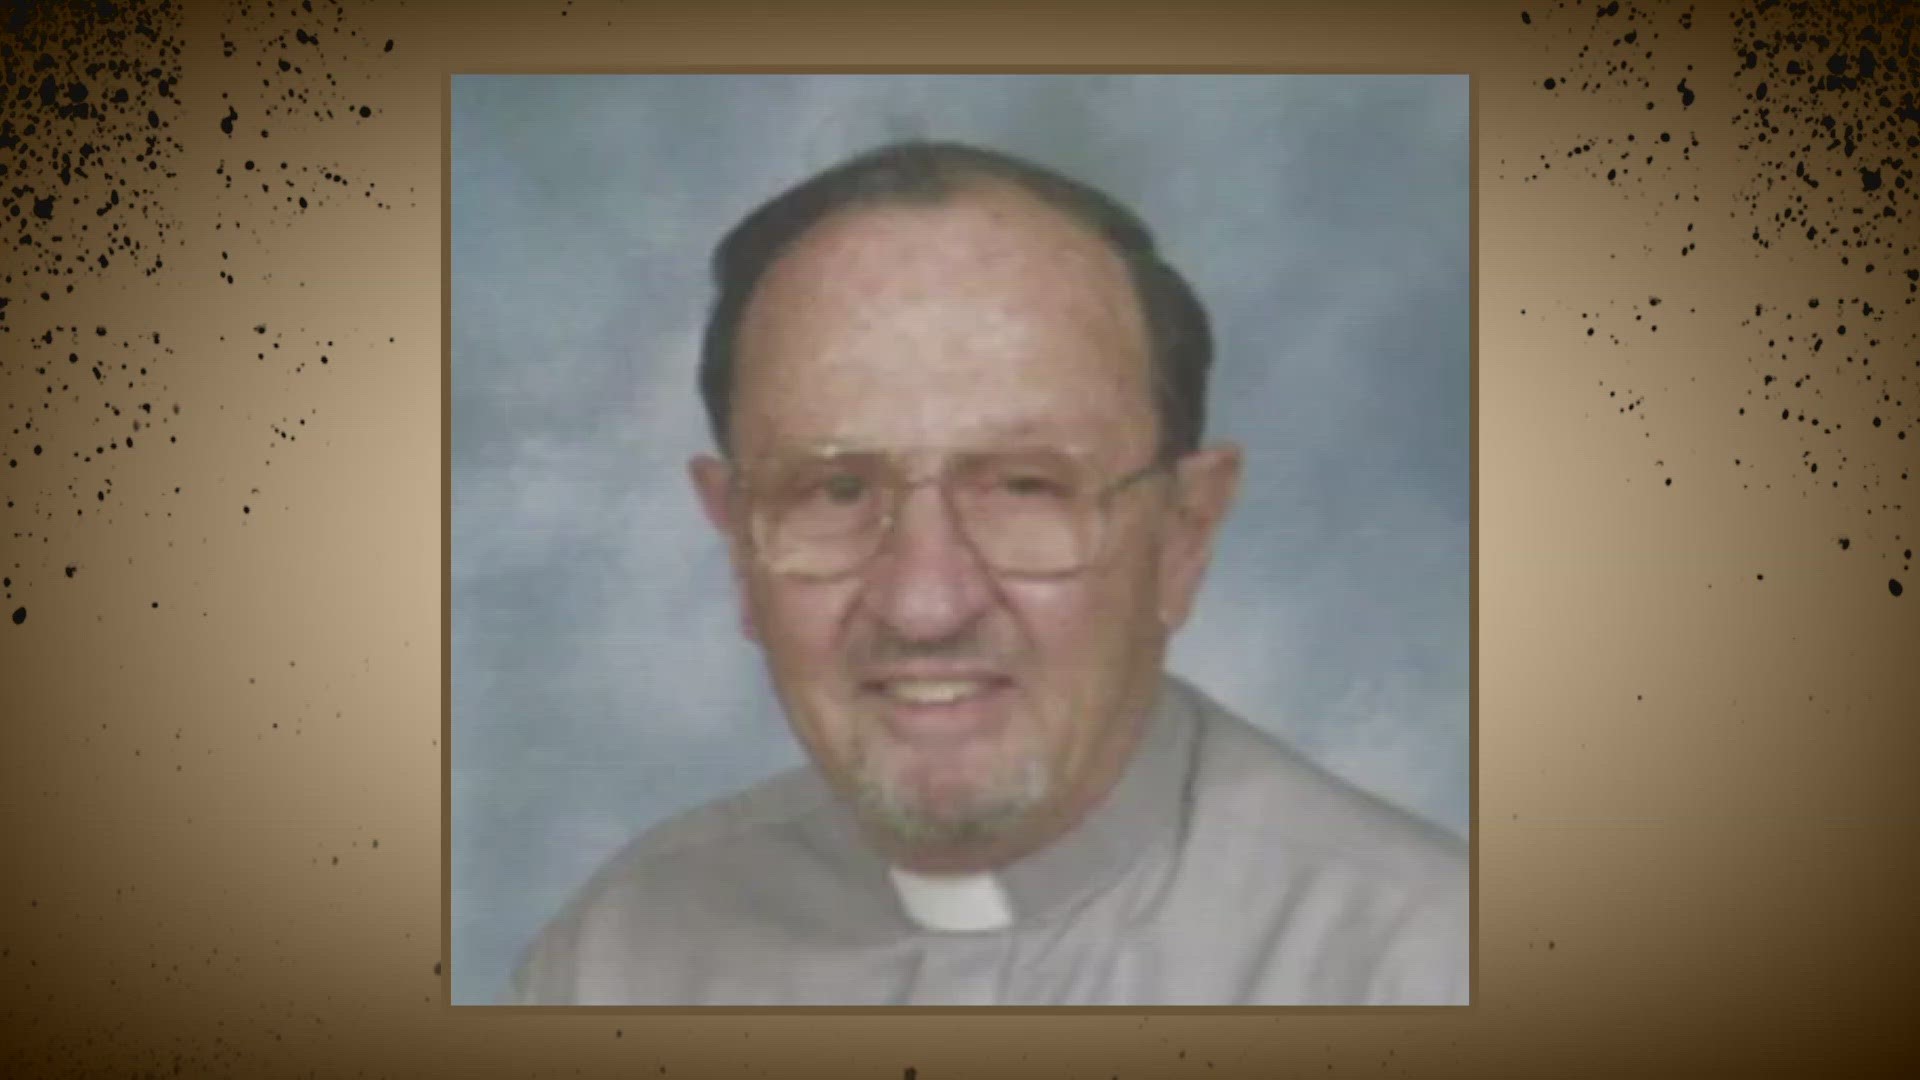 The Archdiocese did not report Father Lawrence Hecker, 91, as a credibly accused child molester until 2018, almost 20 years after he confessed in a letter.